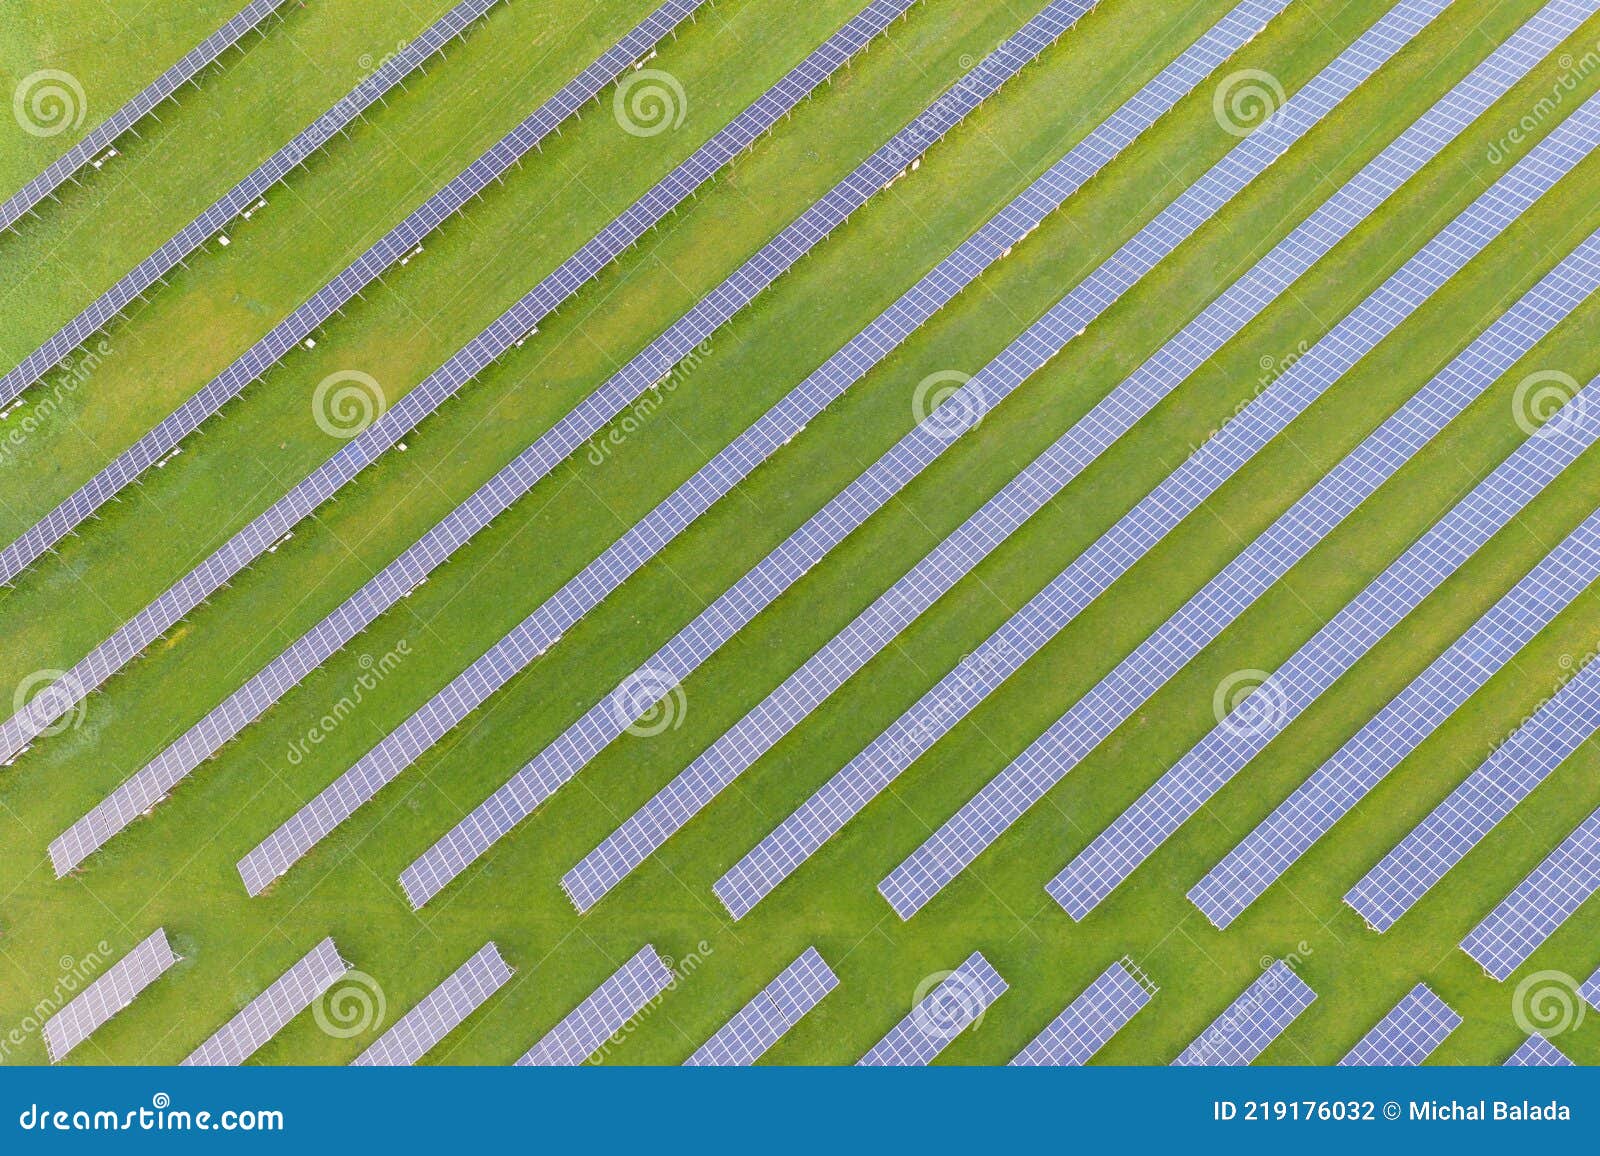 aerial view of solar power plant on green field. electric panels for producing clean ecologic energy. solar cell field. megawatt